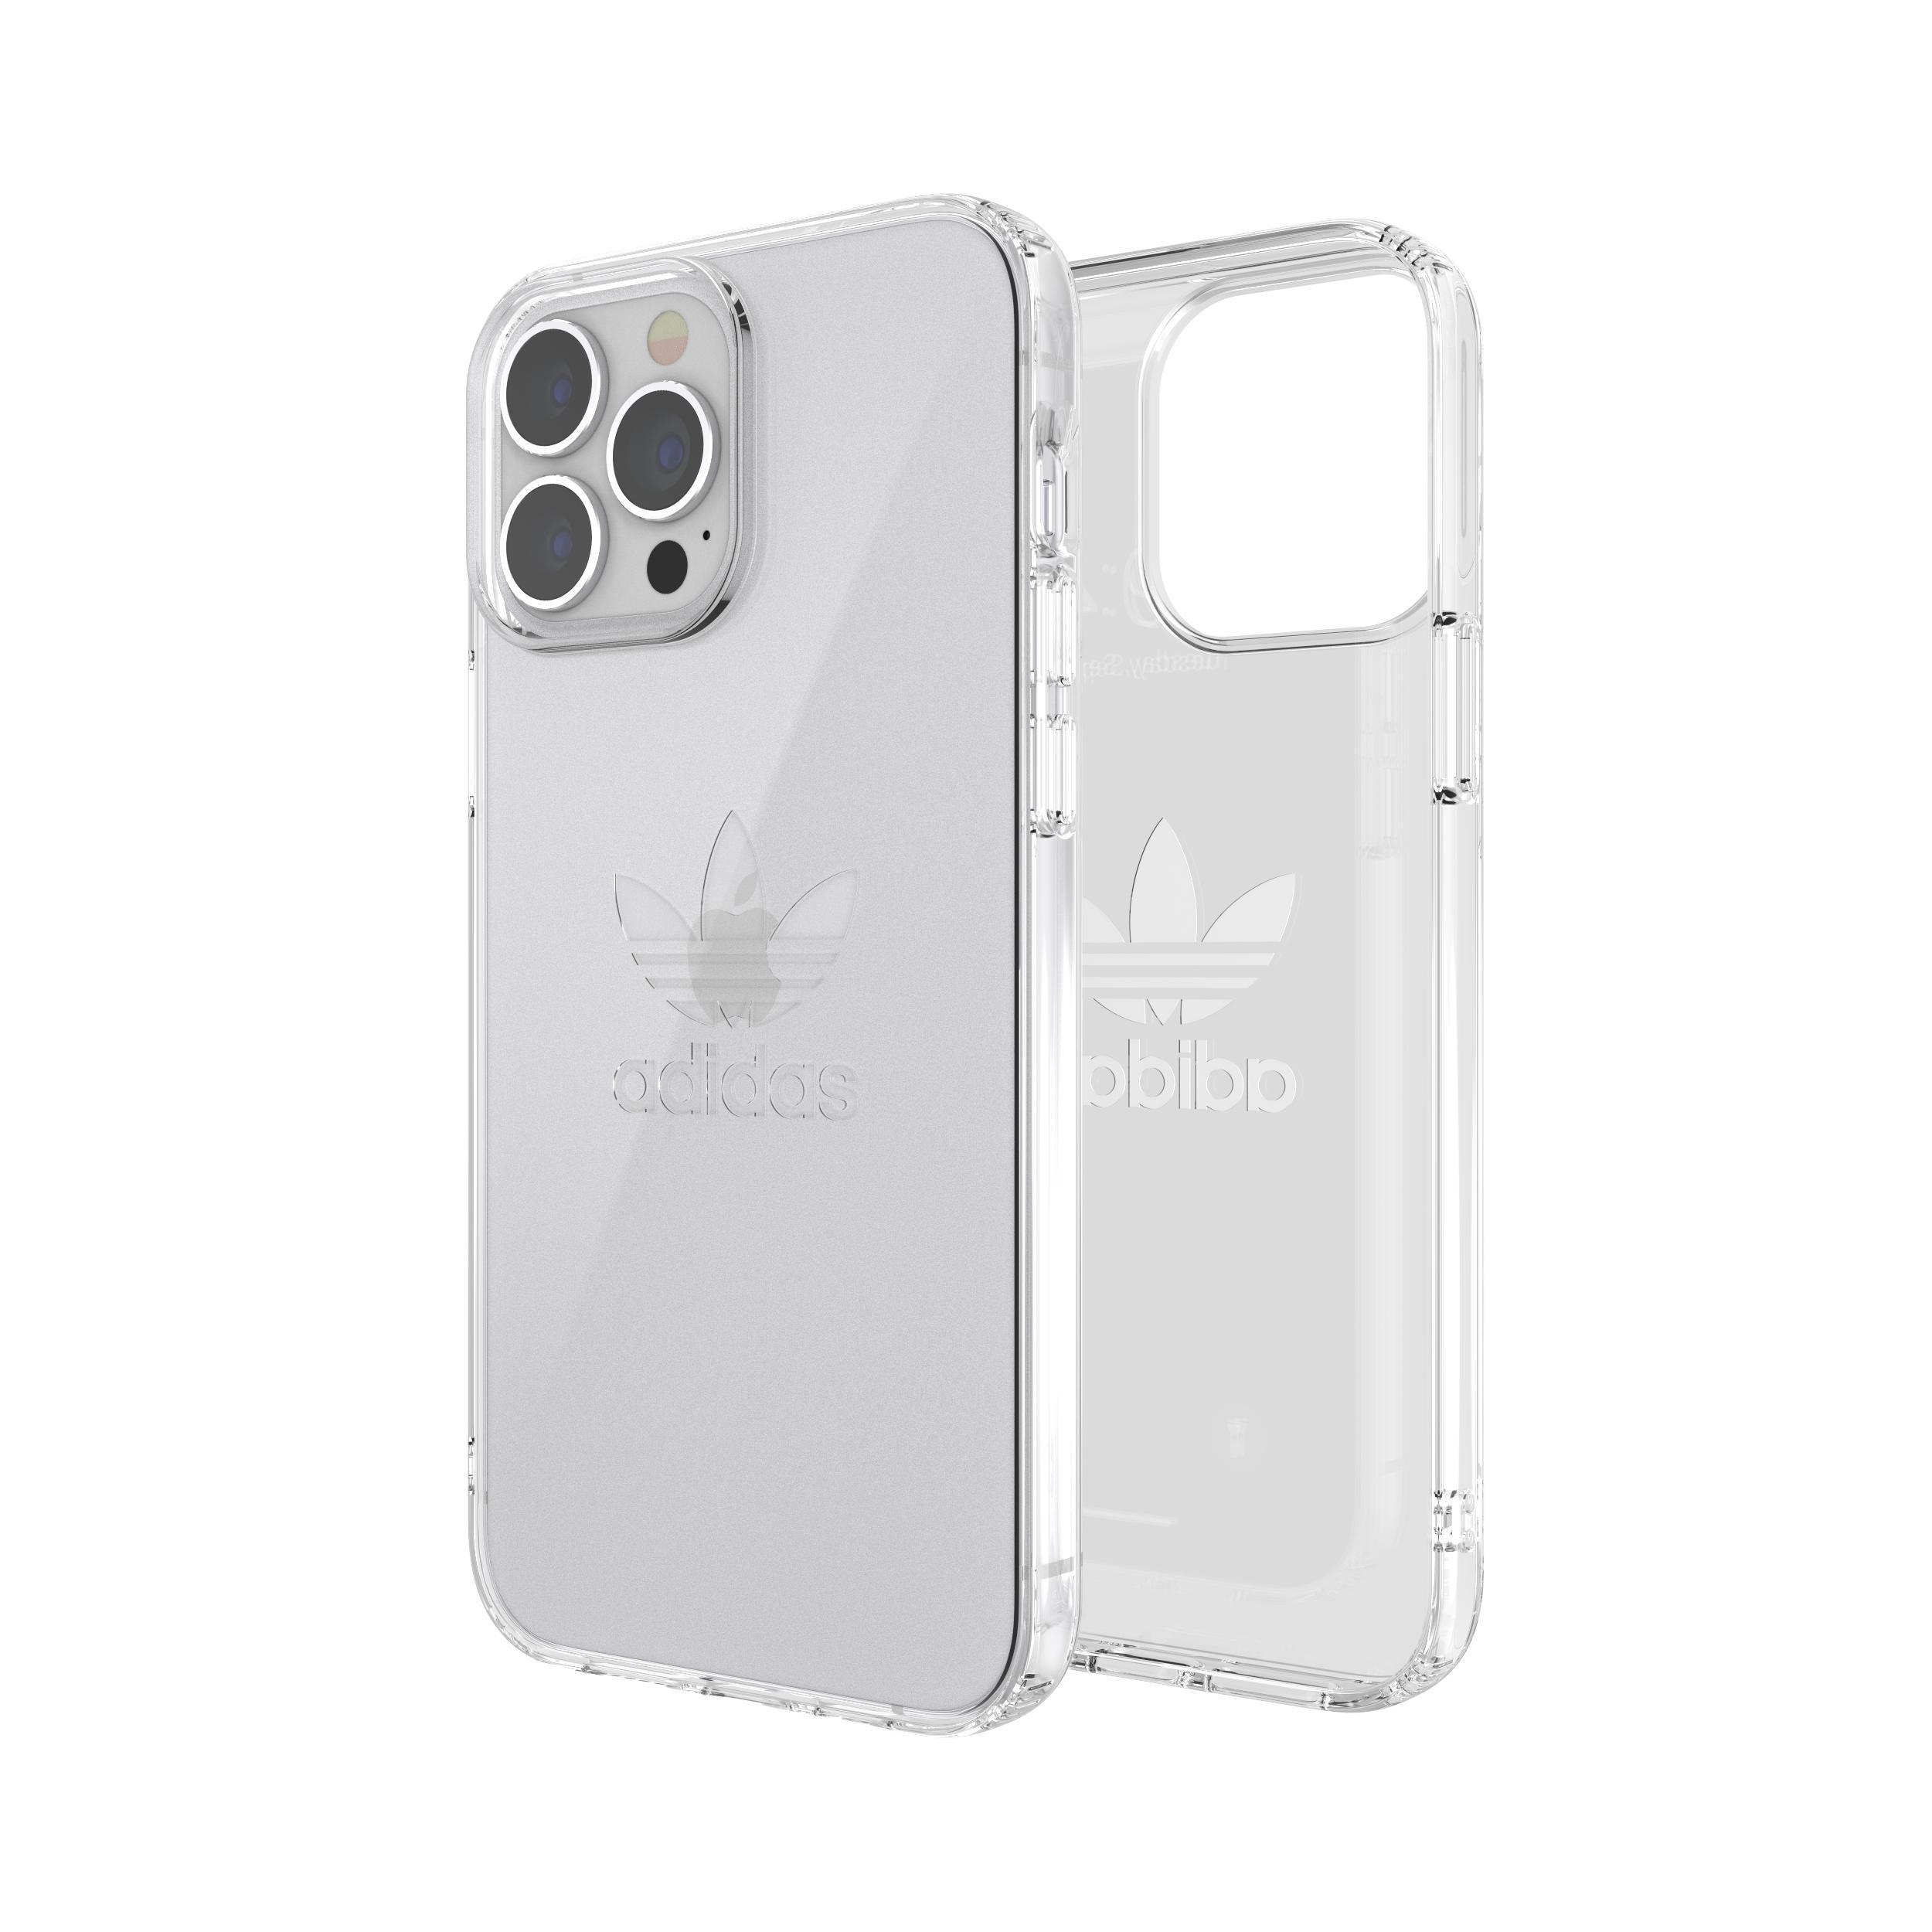 Apple, ORIGINALS Transparent Max, 13 Pro Backcover, Clear, iPhone ADIDAS Protective